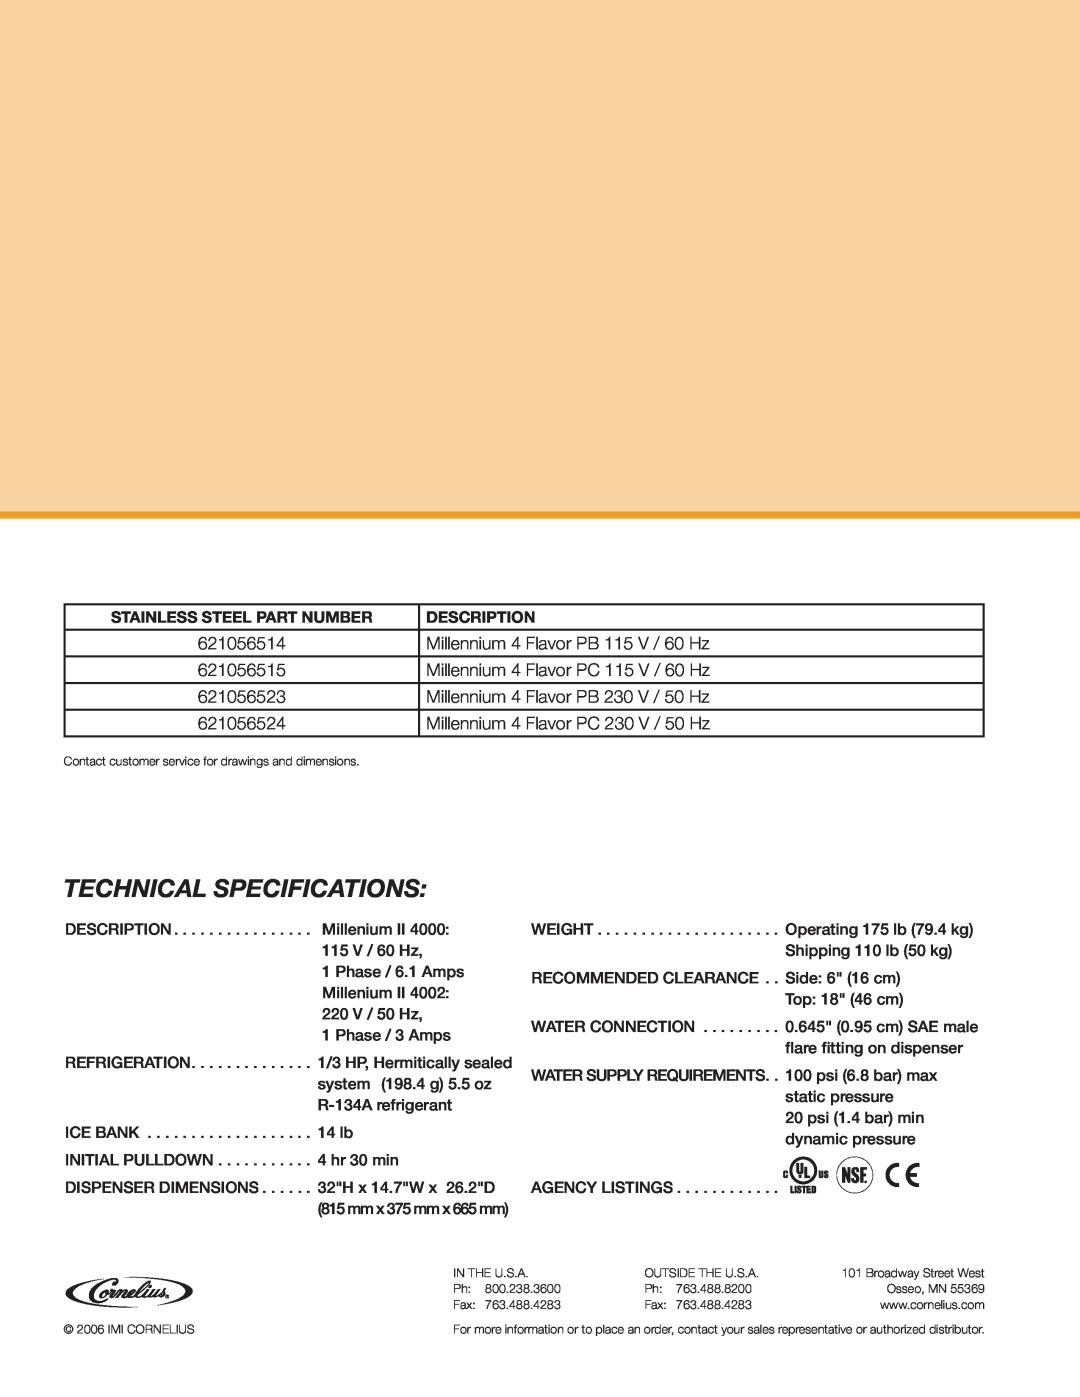 Cornelius 4000 manual Technical Specifications, Stainless Steel Part Number, Description 